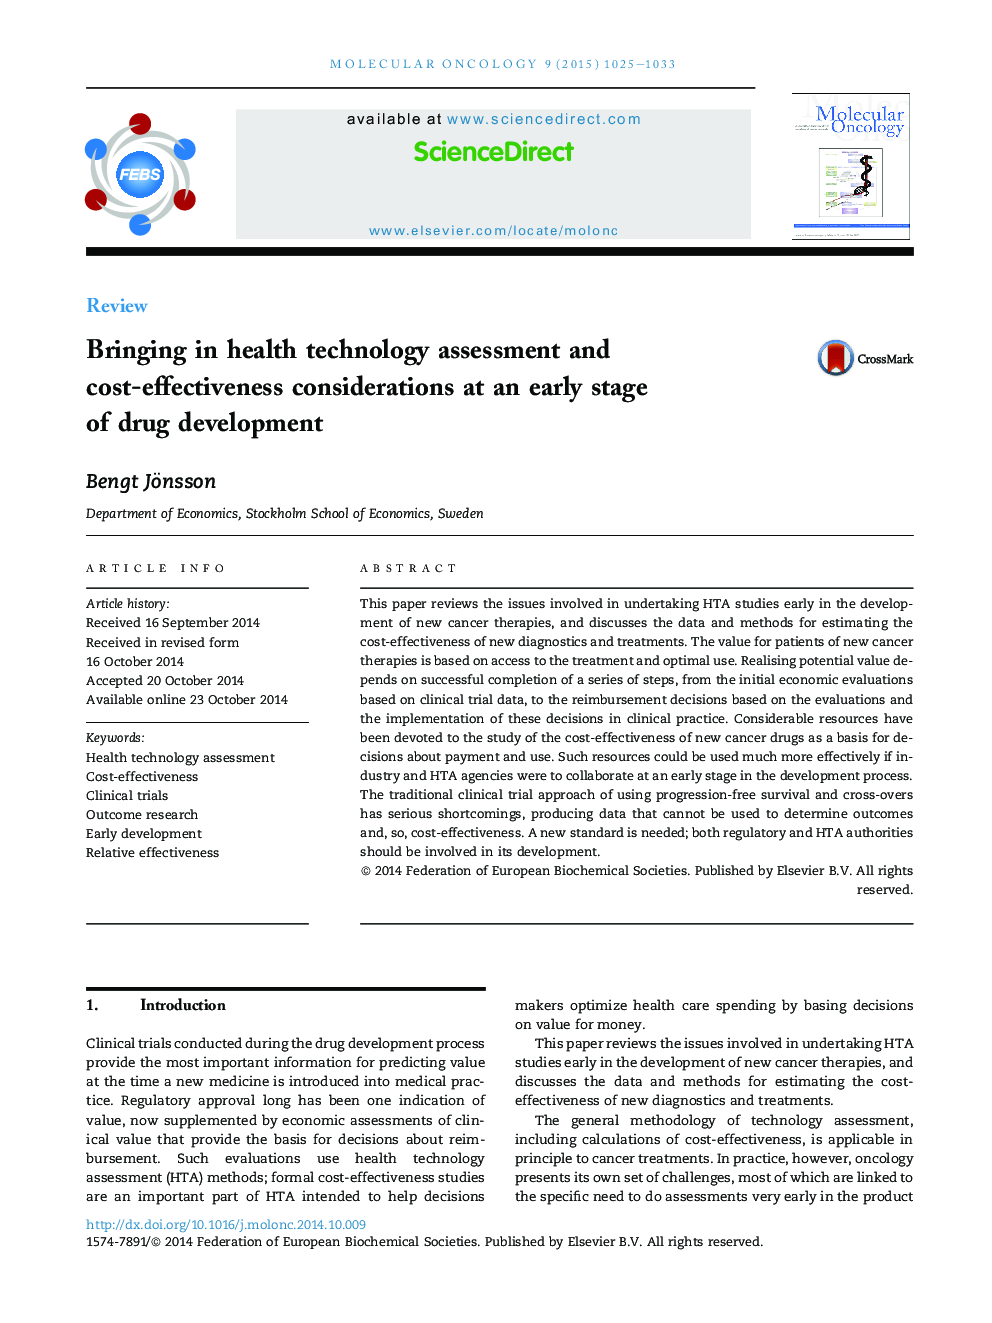 Bringing in health technology assessment and cost-effectiveness considerations at an early stage of drug development